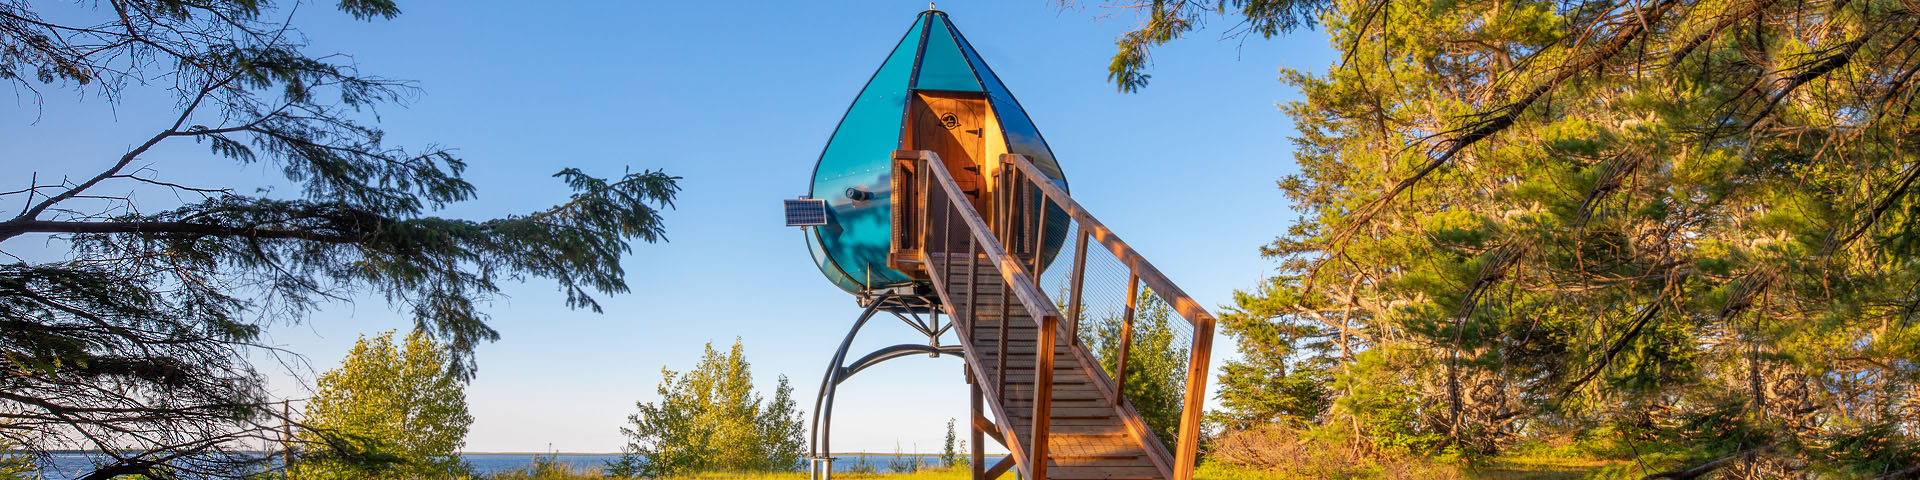 A tear drop-shaped camping accommodation in the woods near a body of water.